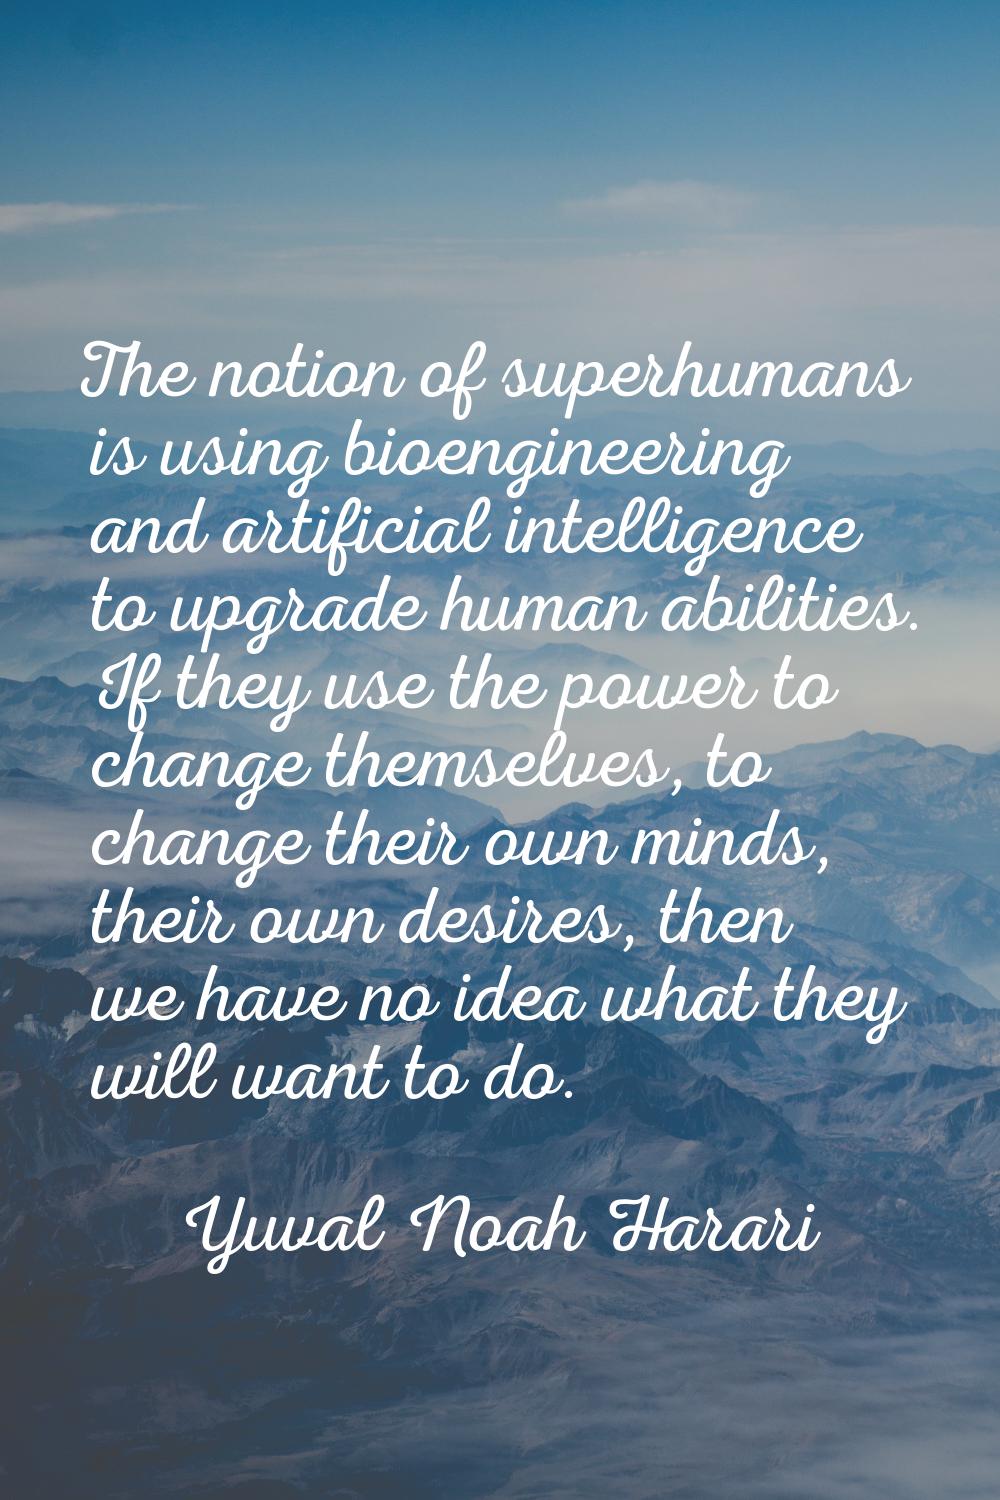 The notion of superhumans is using bioengineering and artificial intelligence to upgrade human abil